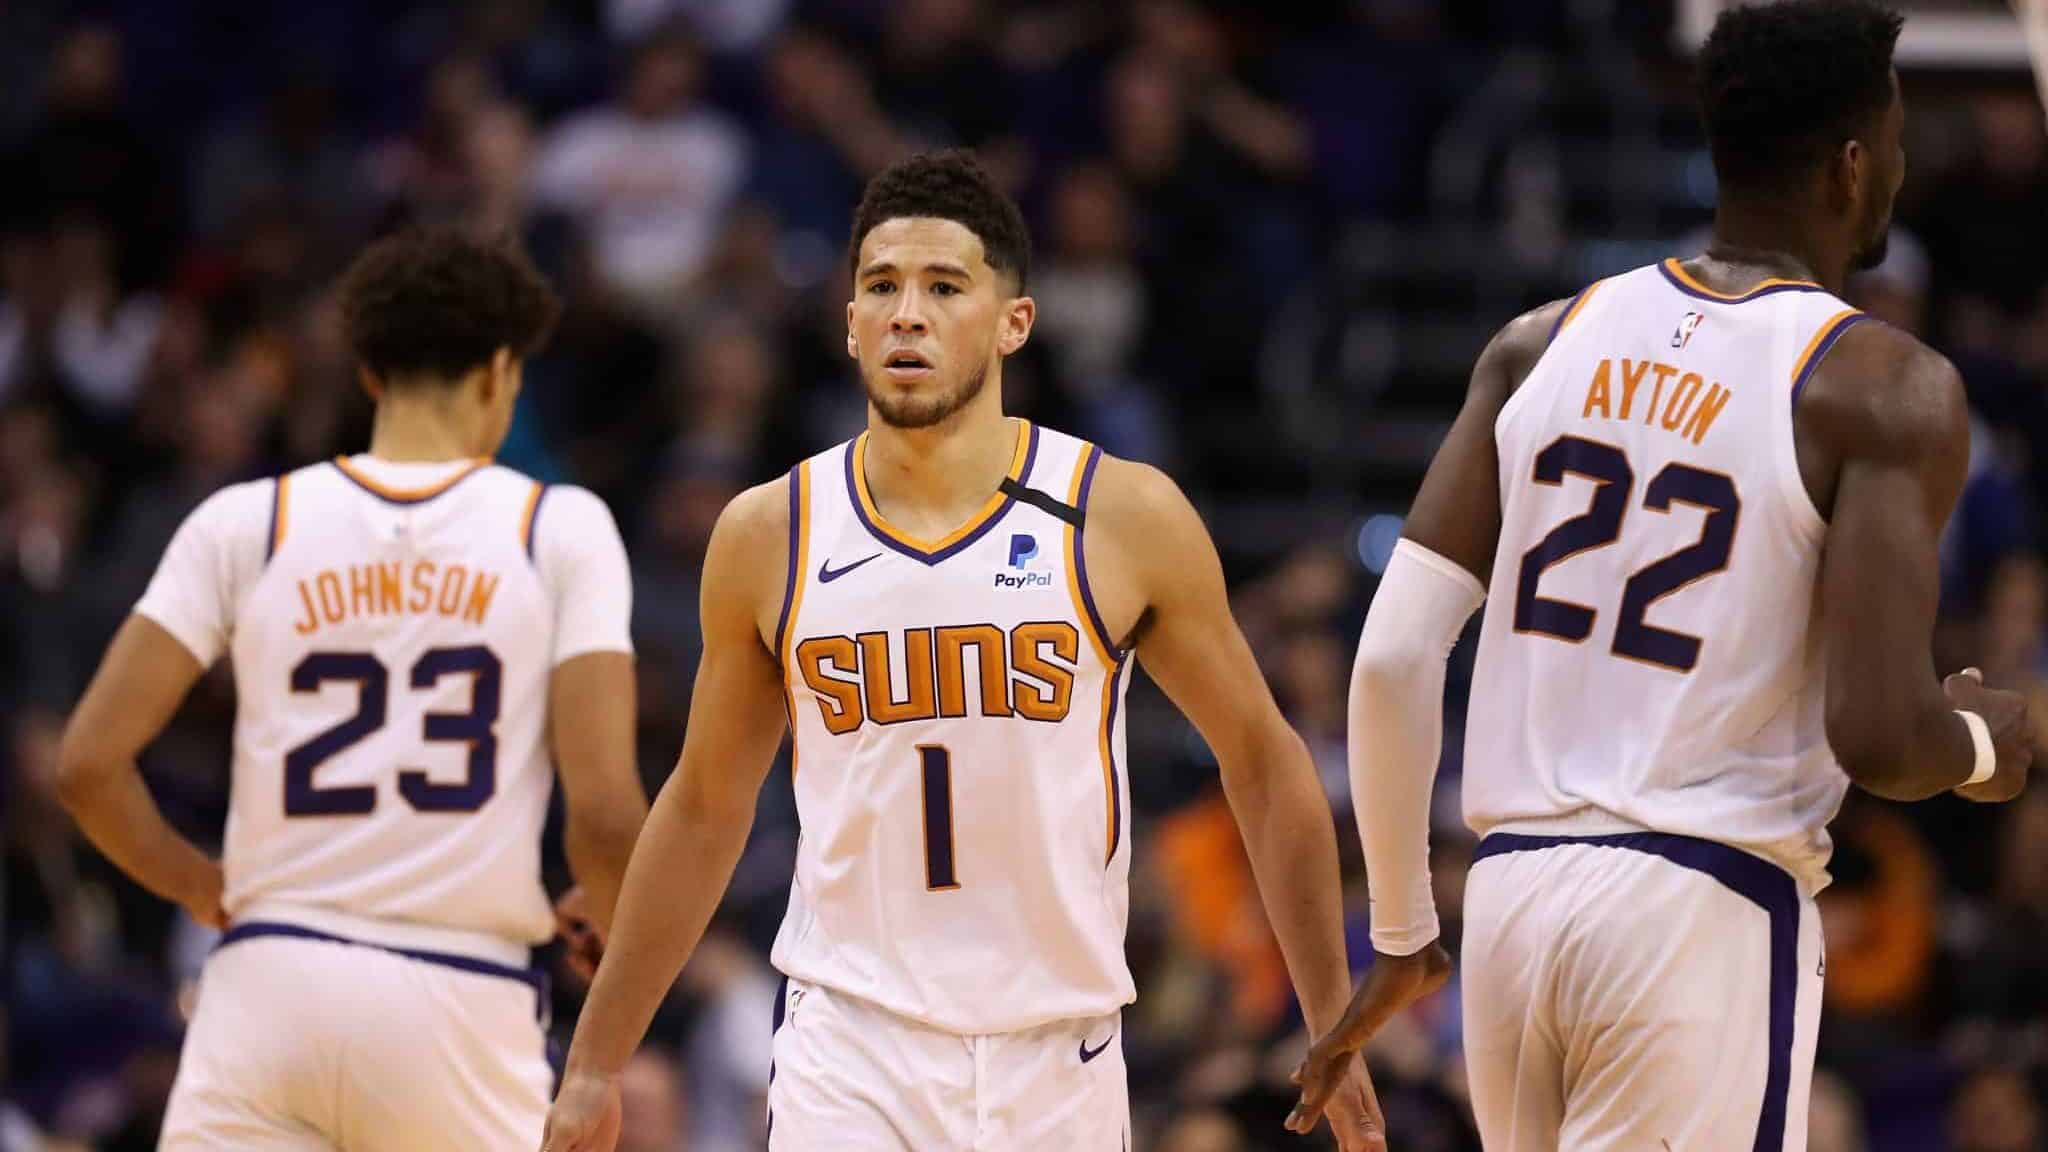 PHOENIX, ARIZONA - FEBRUARY 26: Devin Booker #1 of the Phoenix Suns during the second half of the NBA game against the LA Clippers at Talking Stick Resort Arena on February 26, 2020 in Phoenix, Arizona. The Clippers defeated the Suns 102-92. NOTE TO USER: User expressly acknowledges and agrees that, by downloading and or using this photograph, user is consenting to the terms and conditions of the Getty Images License Agreement. Mandatory Copyright Notice: Copyright 2020 NBAE.